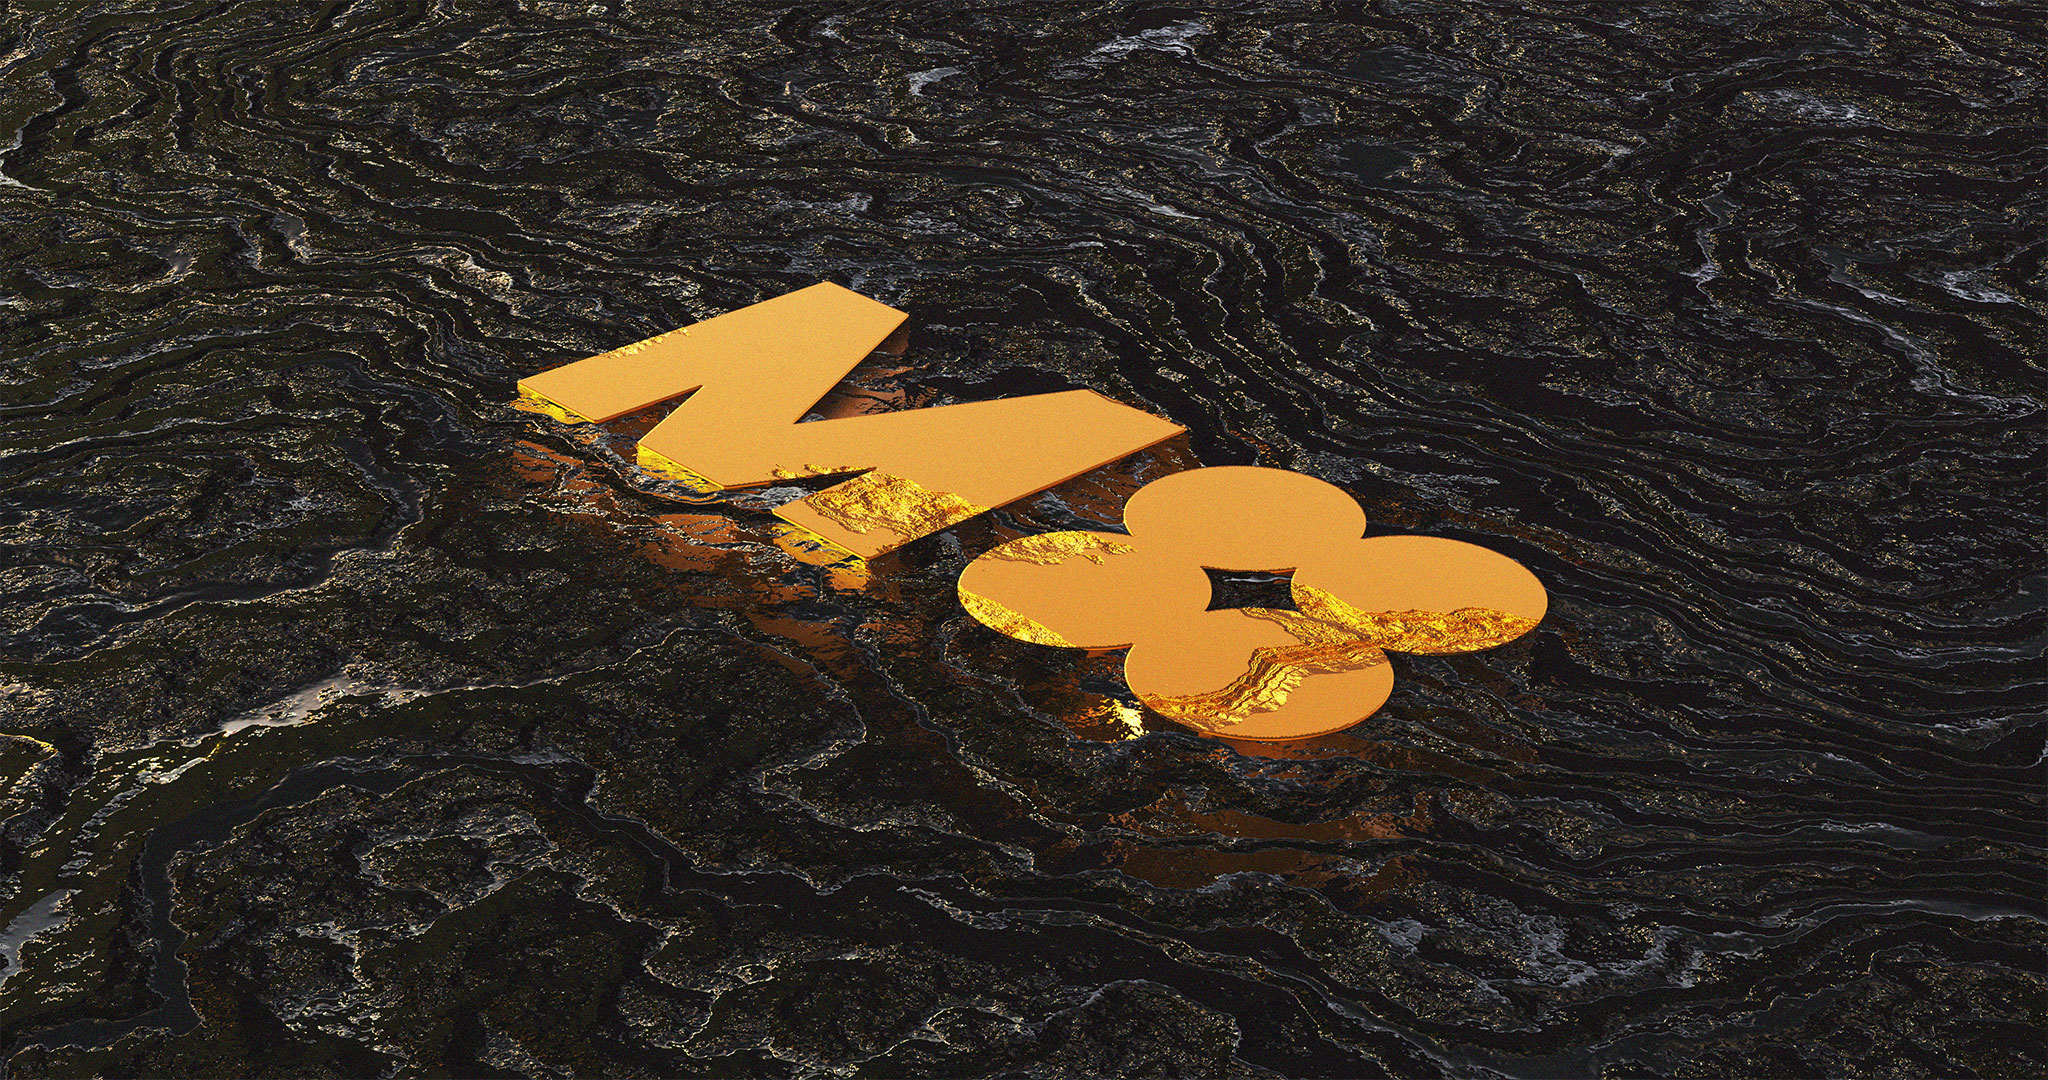 A 3D render of the M4 logotype in a weathered, golden, metallic material, embedded in shiny, frozen lava rock.